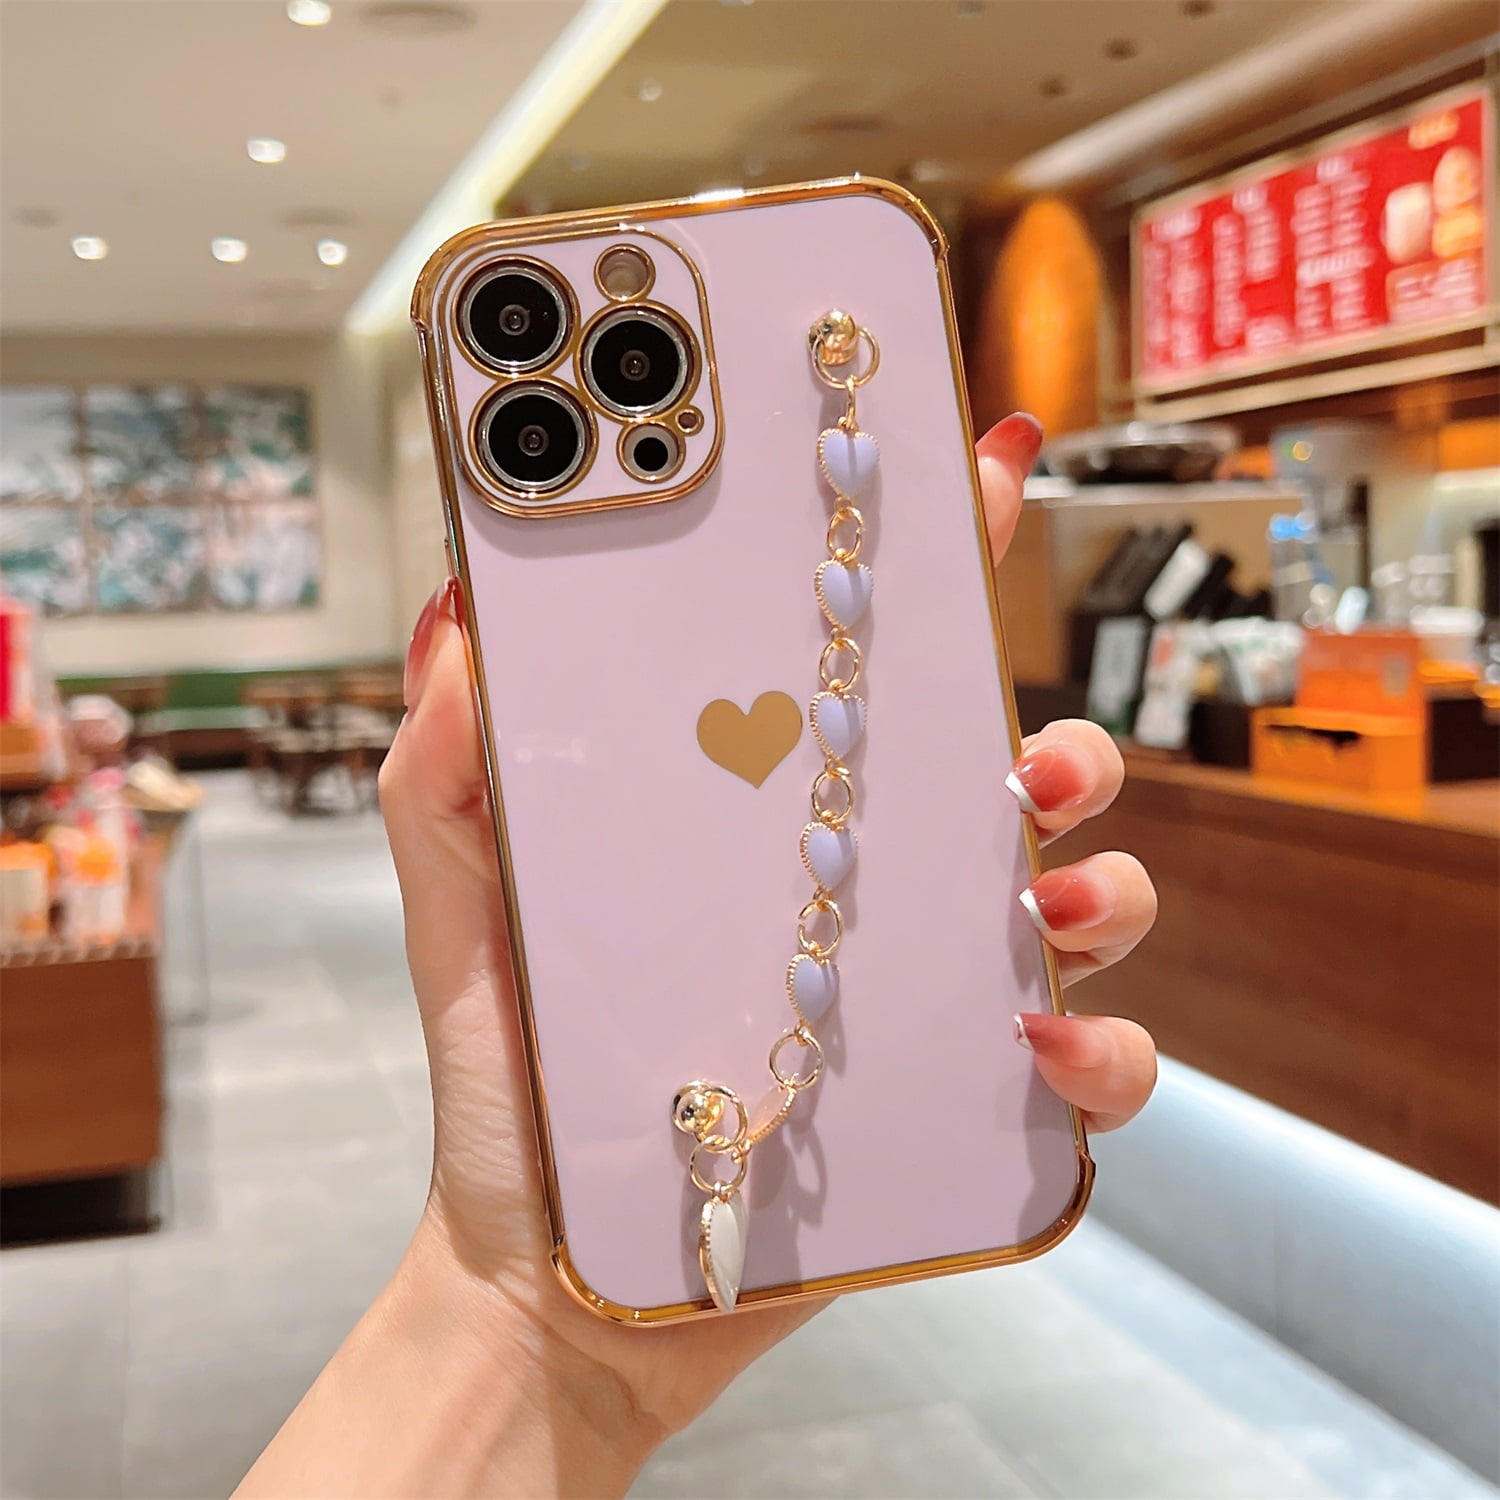 Dteck Luxury iPhone 12 Mini Cute Case for Women,Sparkle Plating Heart Case  with Chain Strap Camera Lens Protective Girly Case For iPhone 12